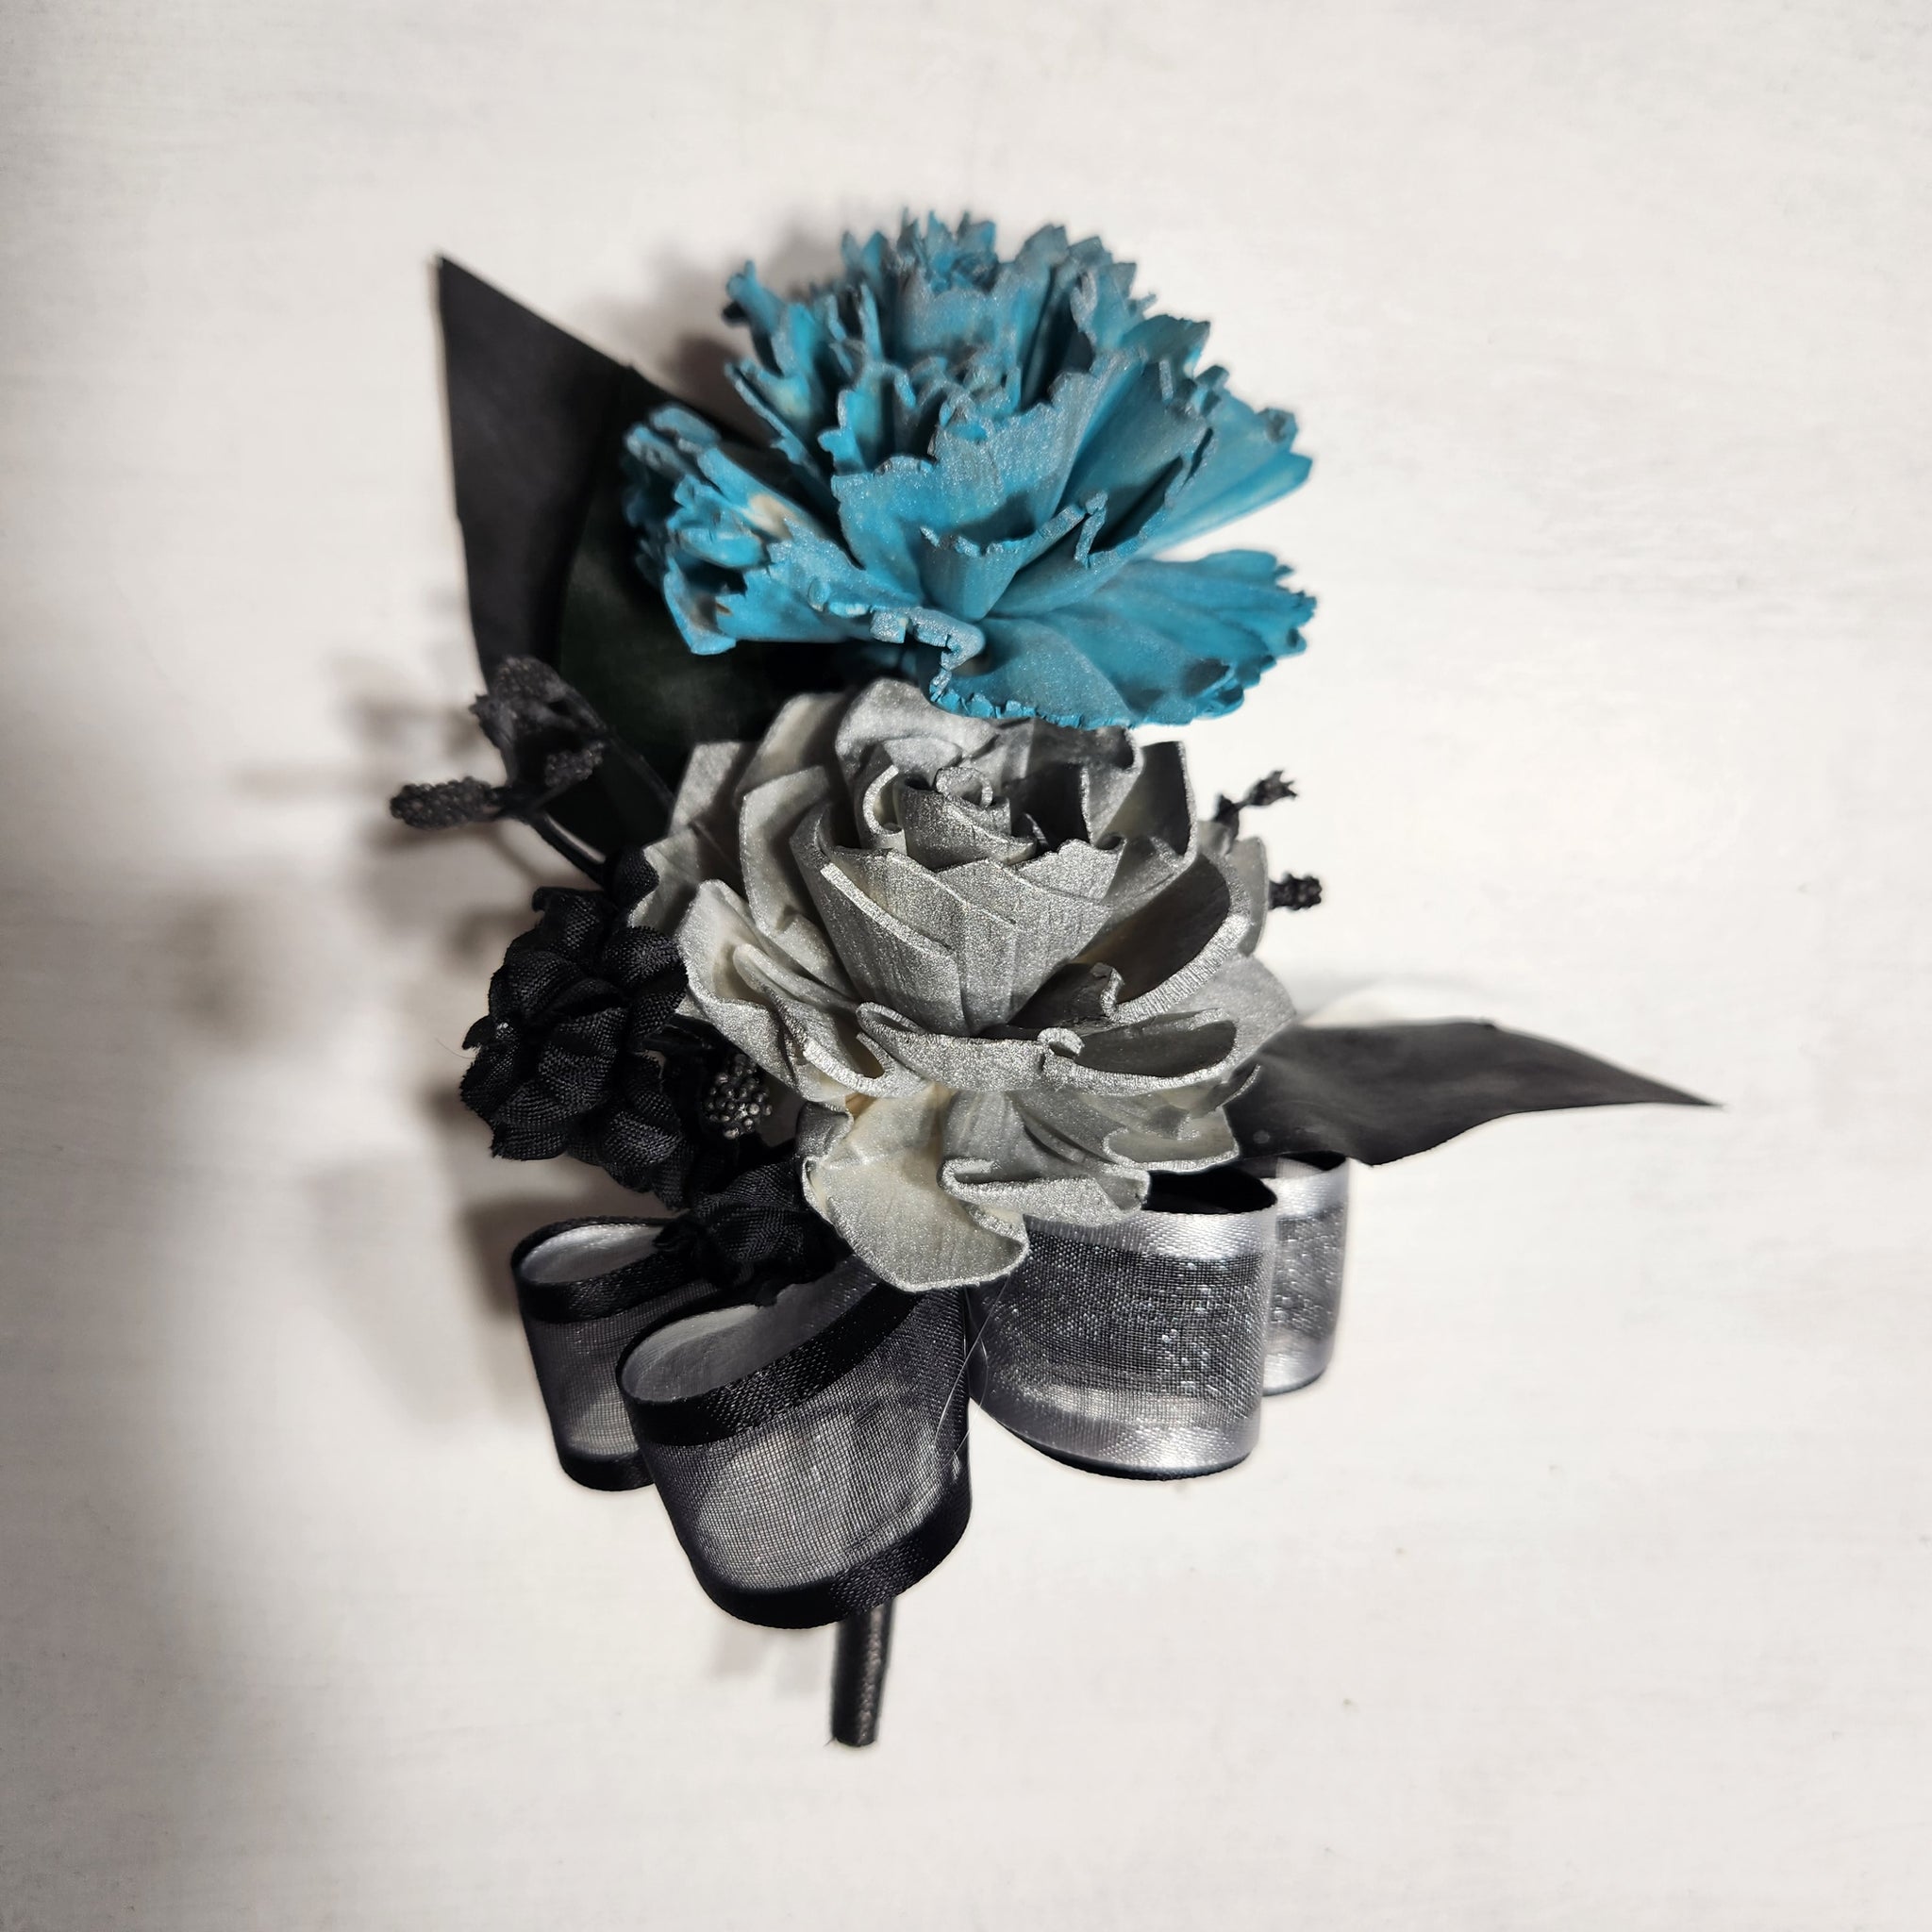 Turquoise Silver Sola Wood Flower Bridal Wedding Bouquet Accessories